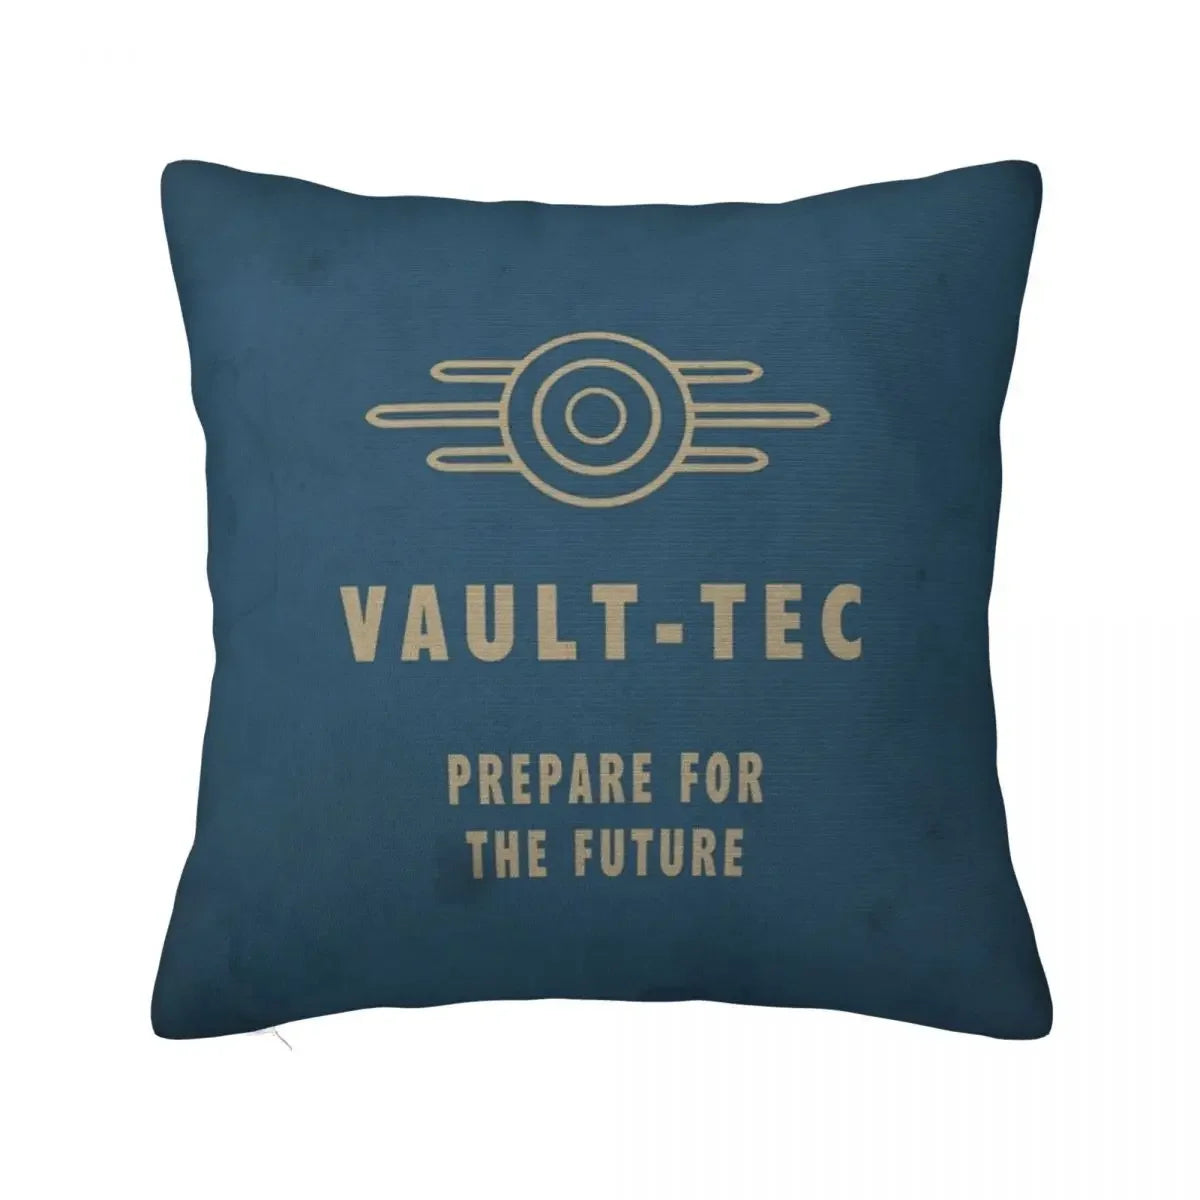 Fallout 4 Vault-tec Logo Square Pillowcase Cushion Cover Decorative Pillow Case Polyester Throw Pillow cover For Home Bedroom As shown / 45x45cm - IHavePaws